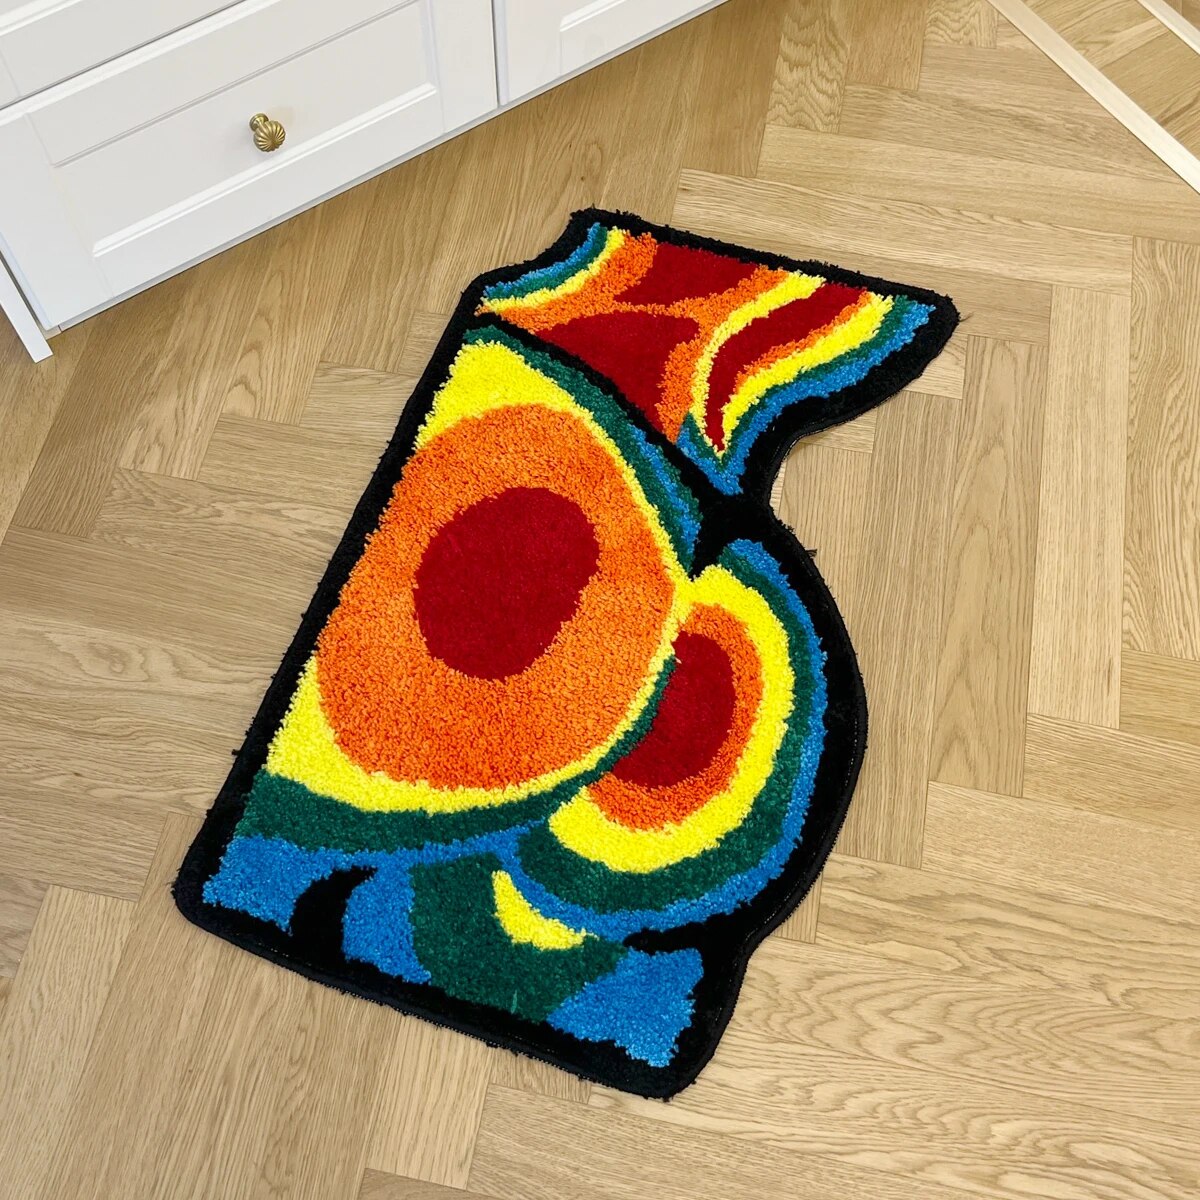 Sexy Woman Butt Infrared Colored Rug,